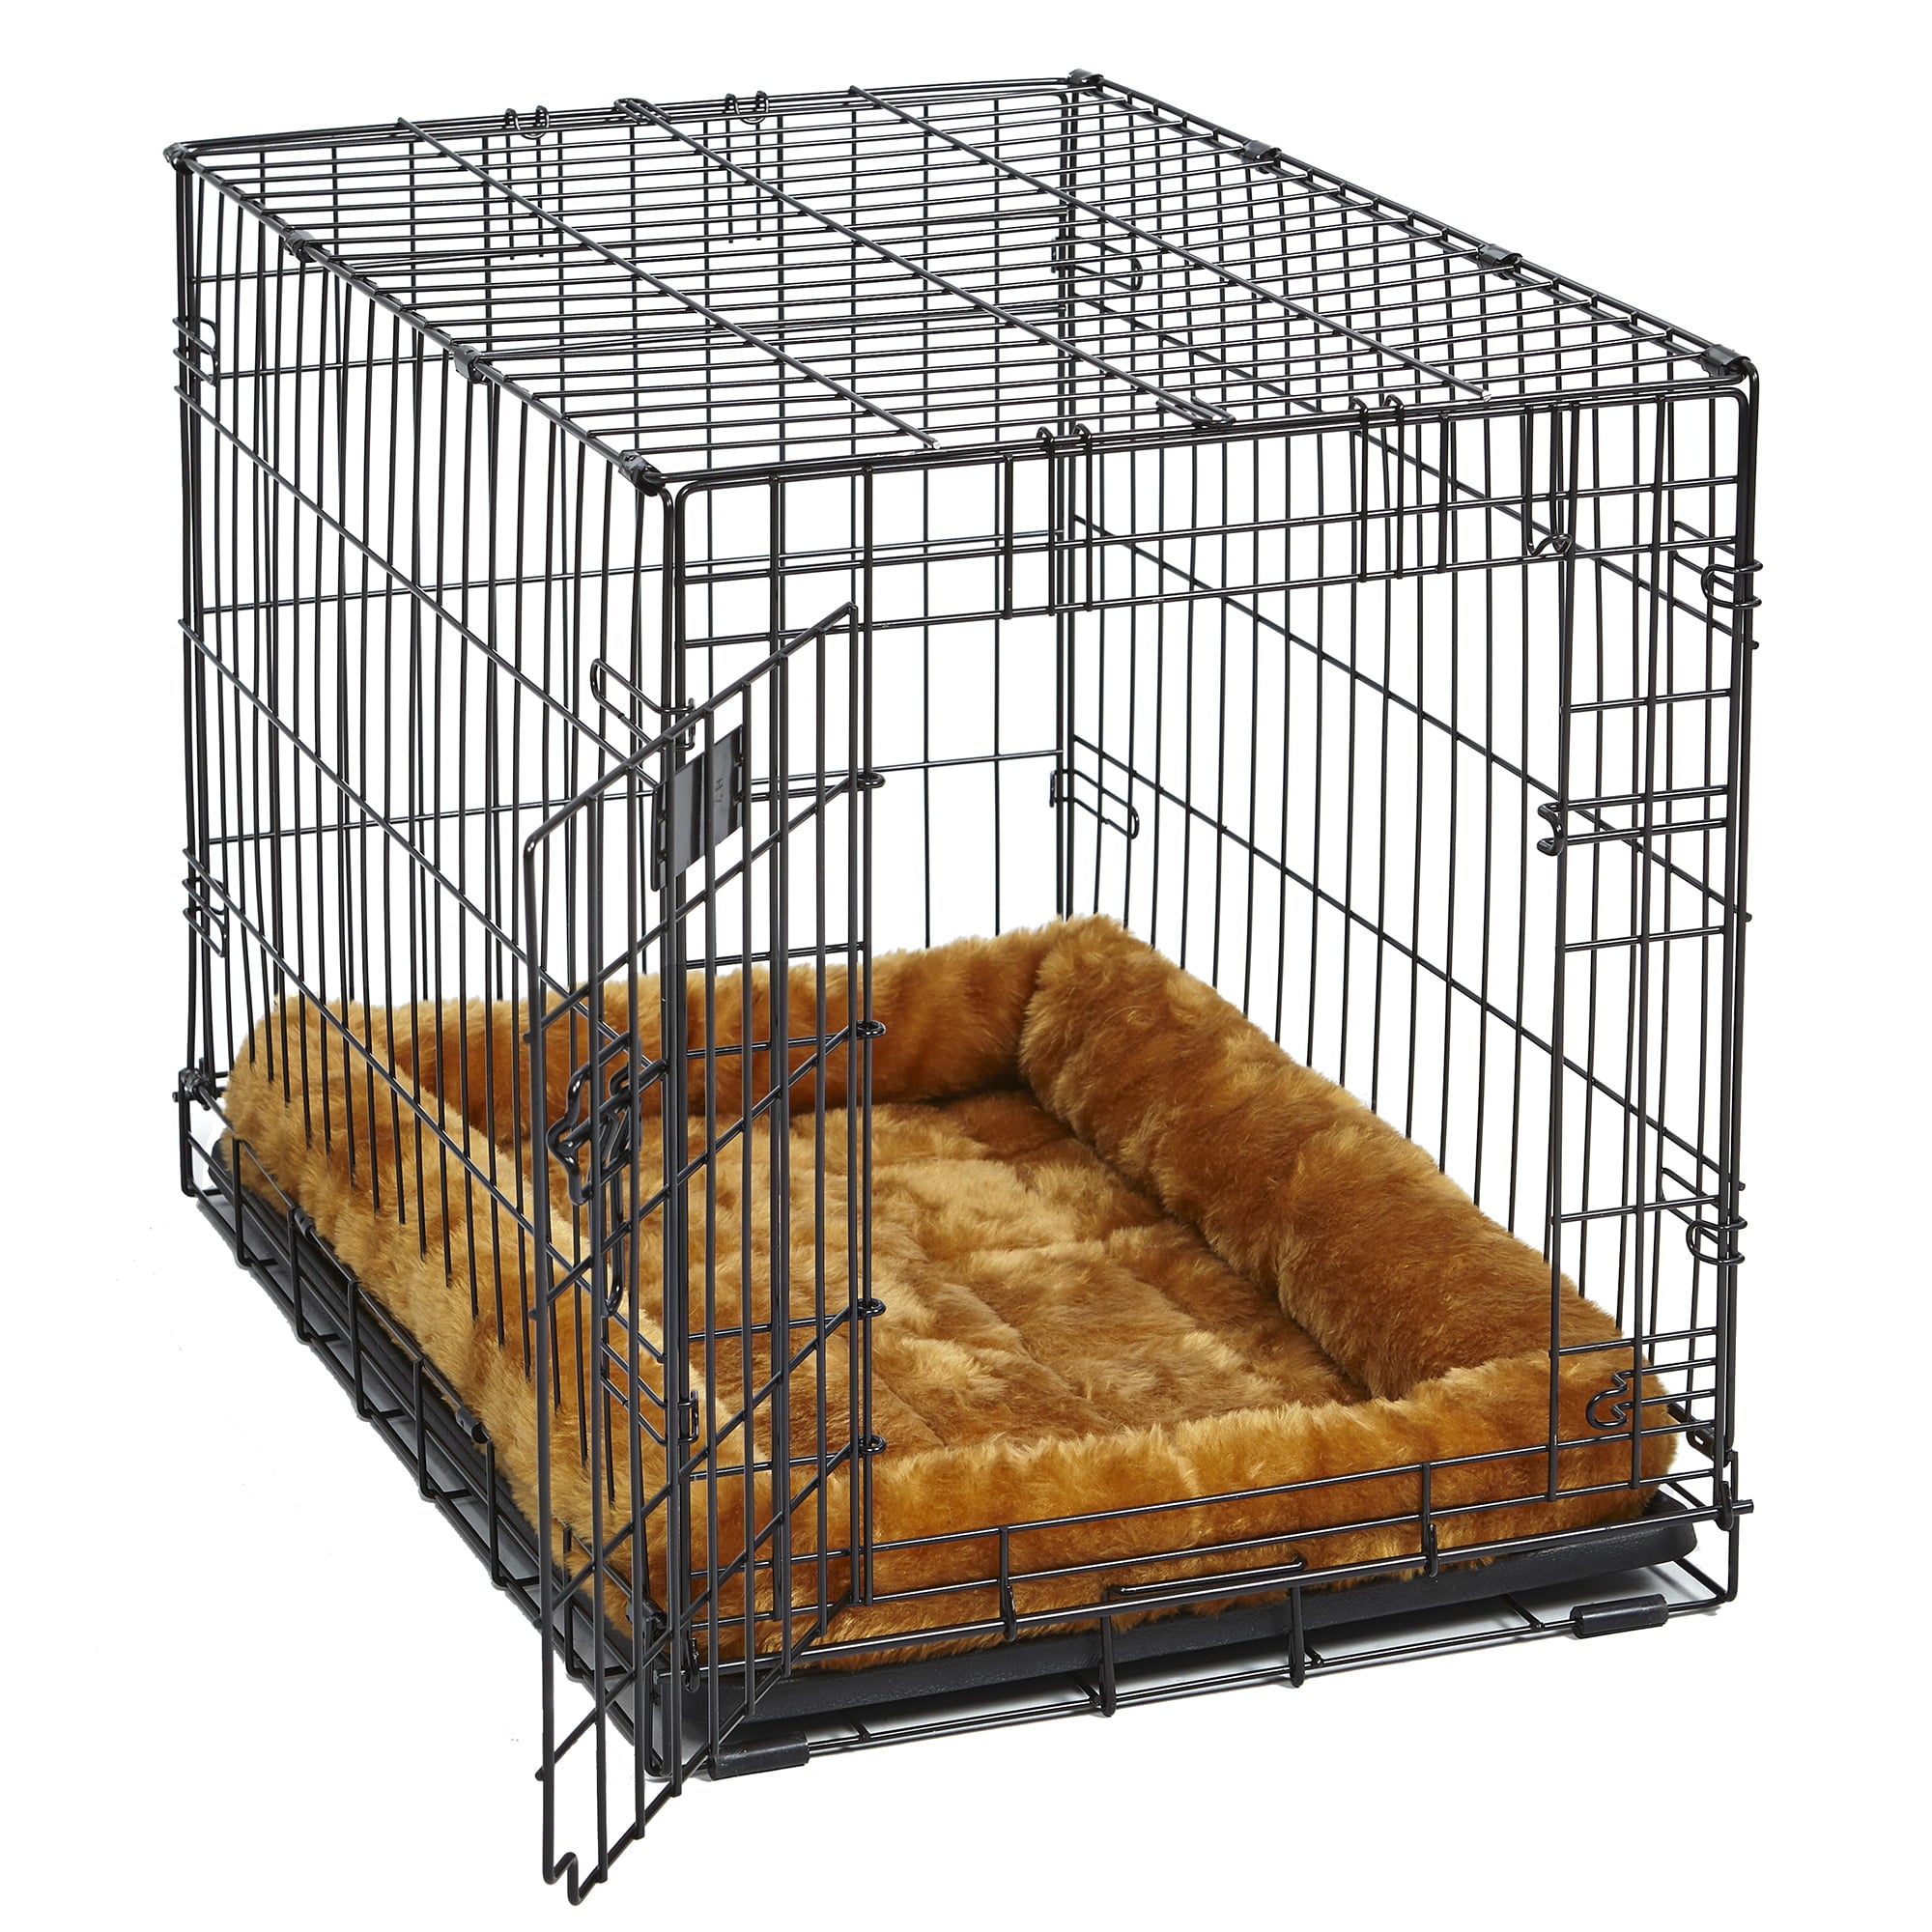 MidWest QuietTime Pet Bed and Dog Crate Mat， Cinnamon， 22